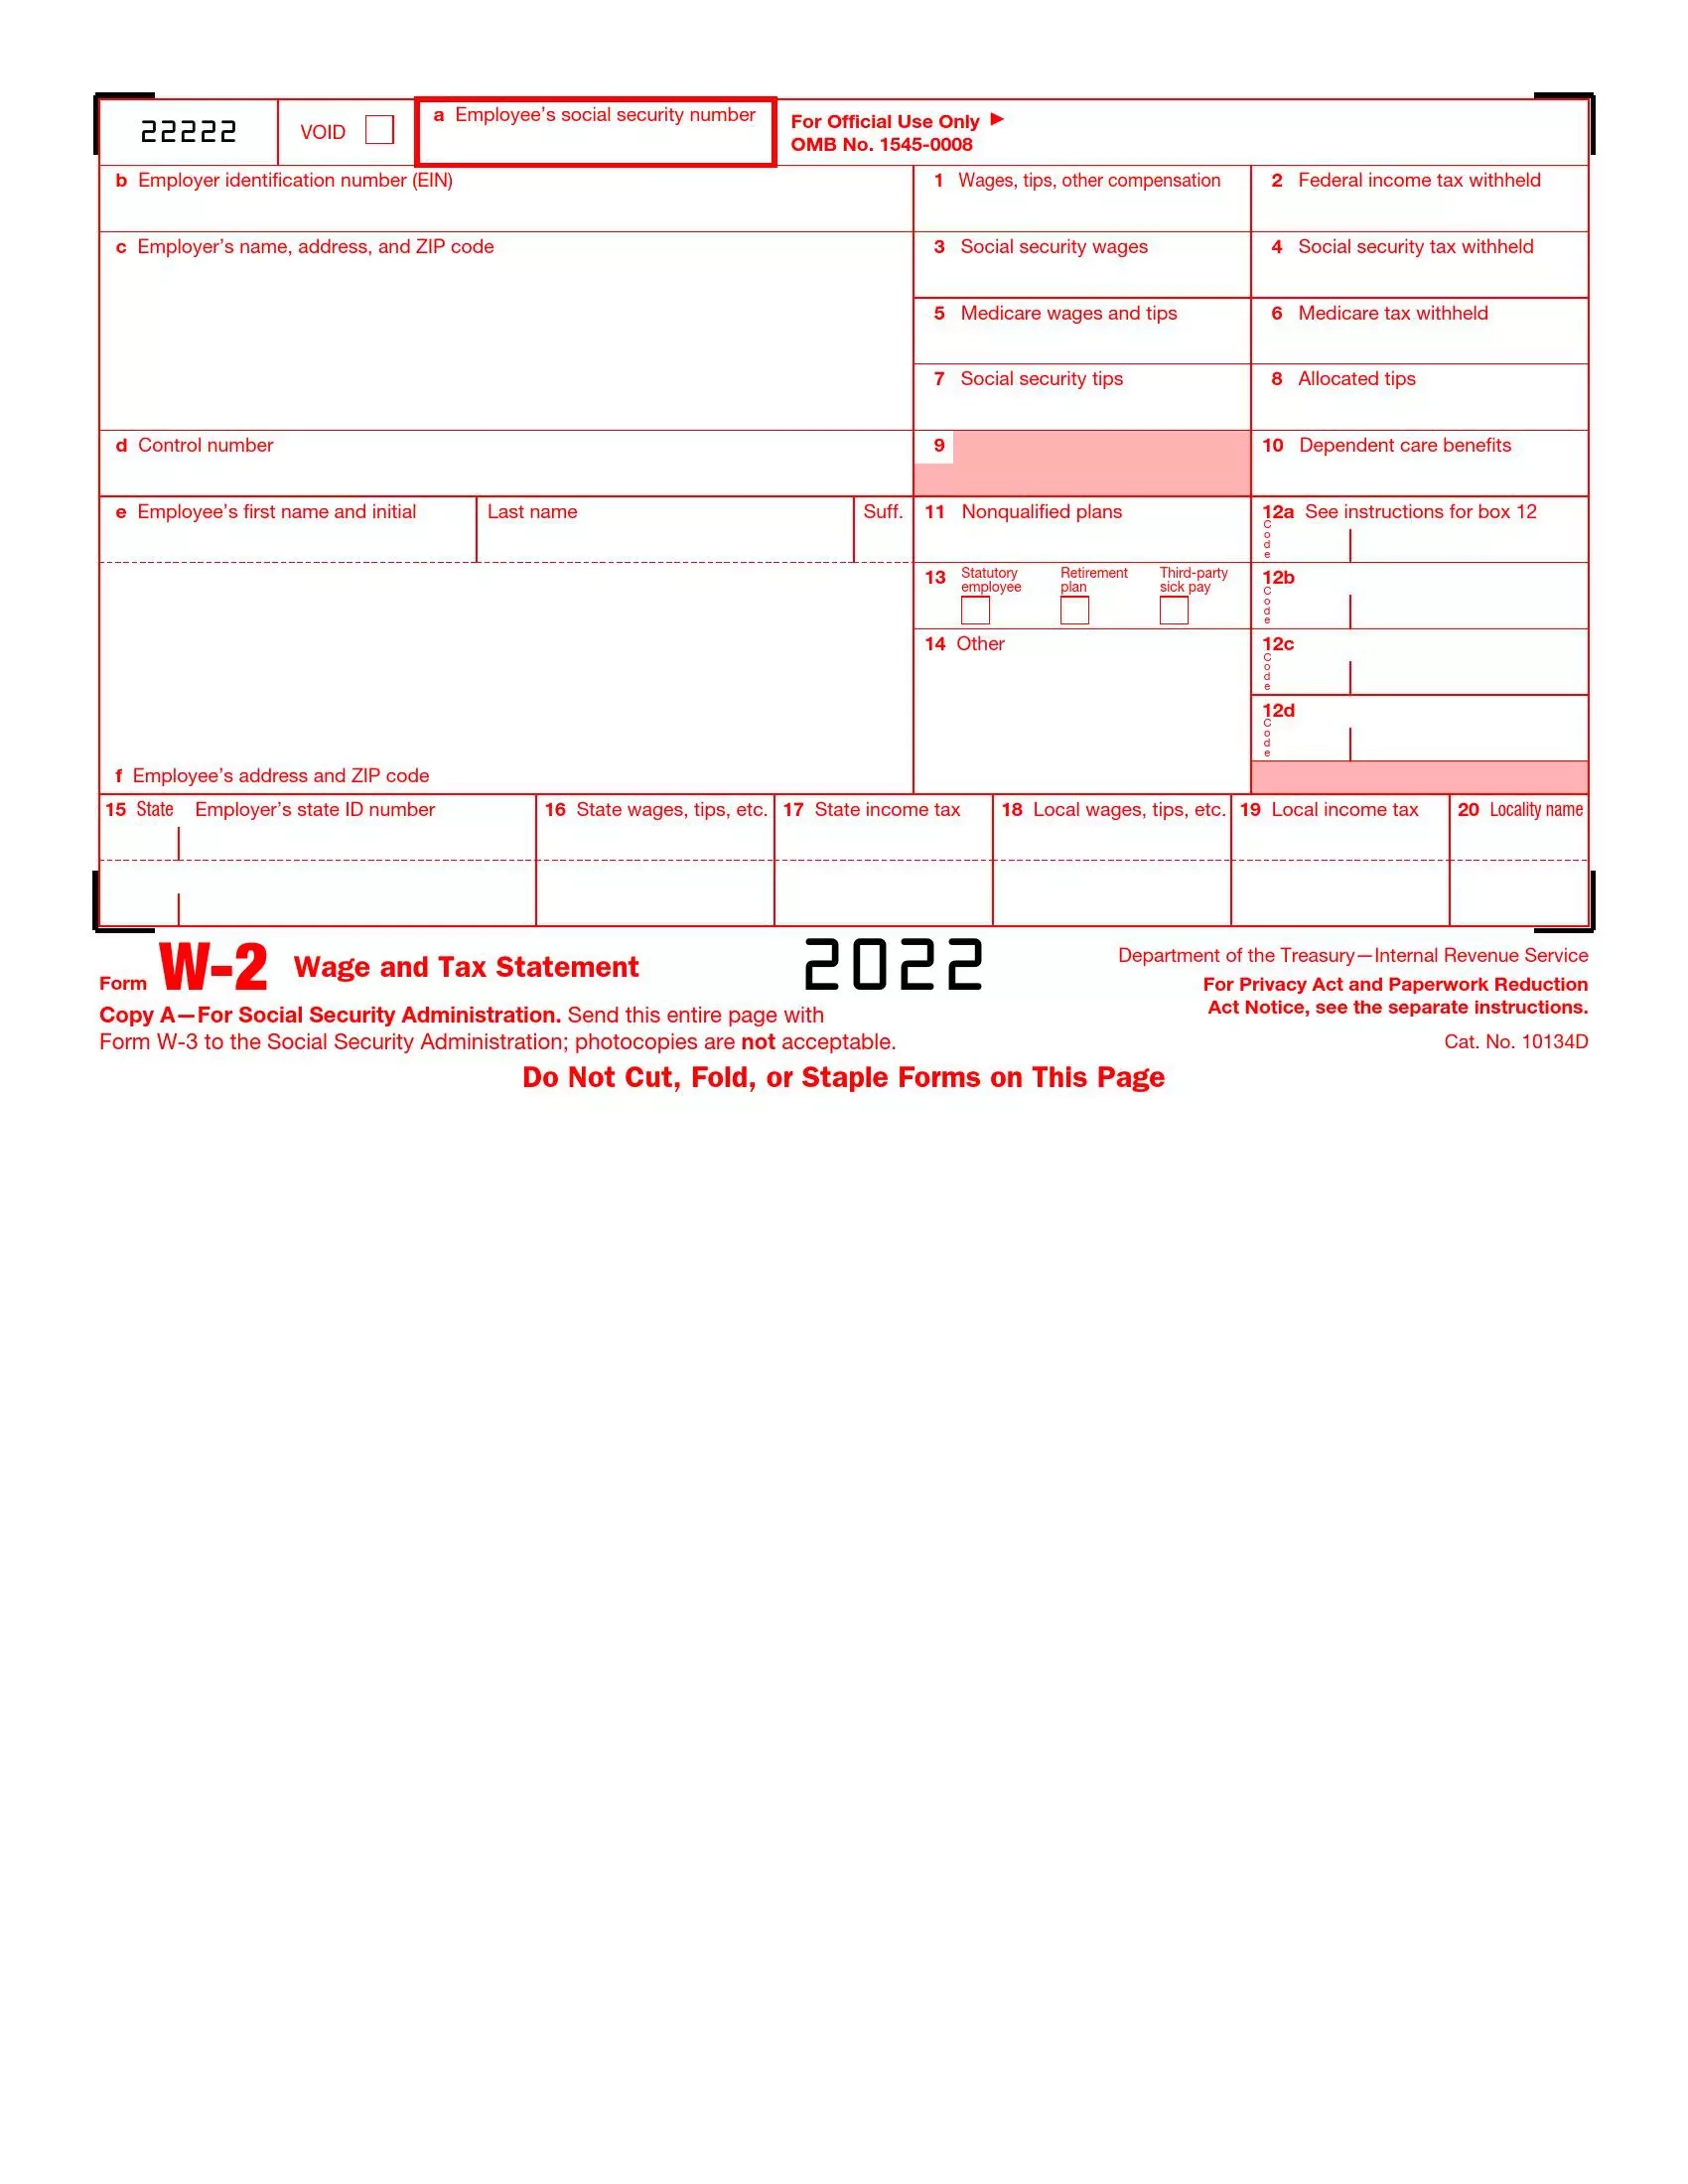 Irs Form W-2 ≡ Fill Out Printable Pdf Forms Online regarding Family Dollar W2 Form